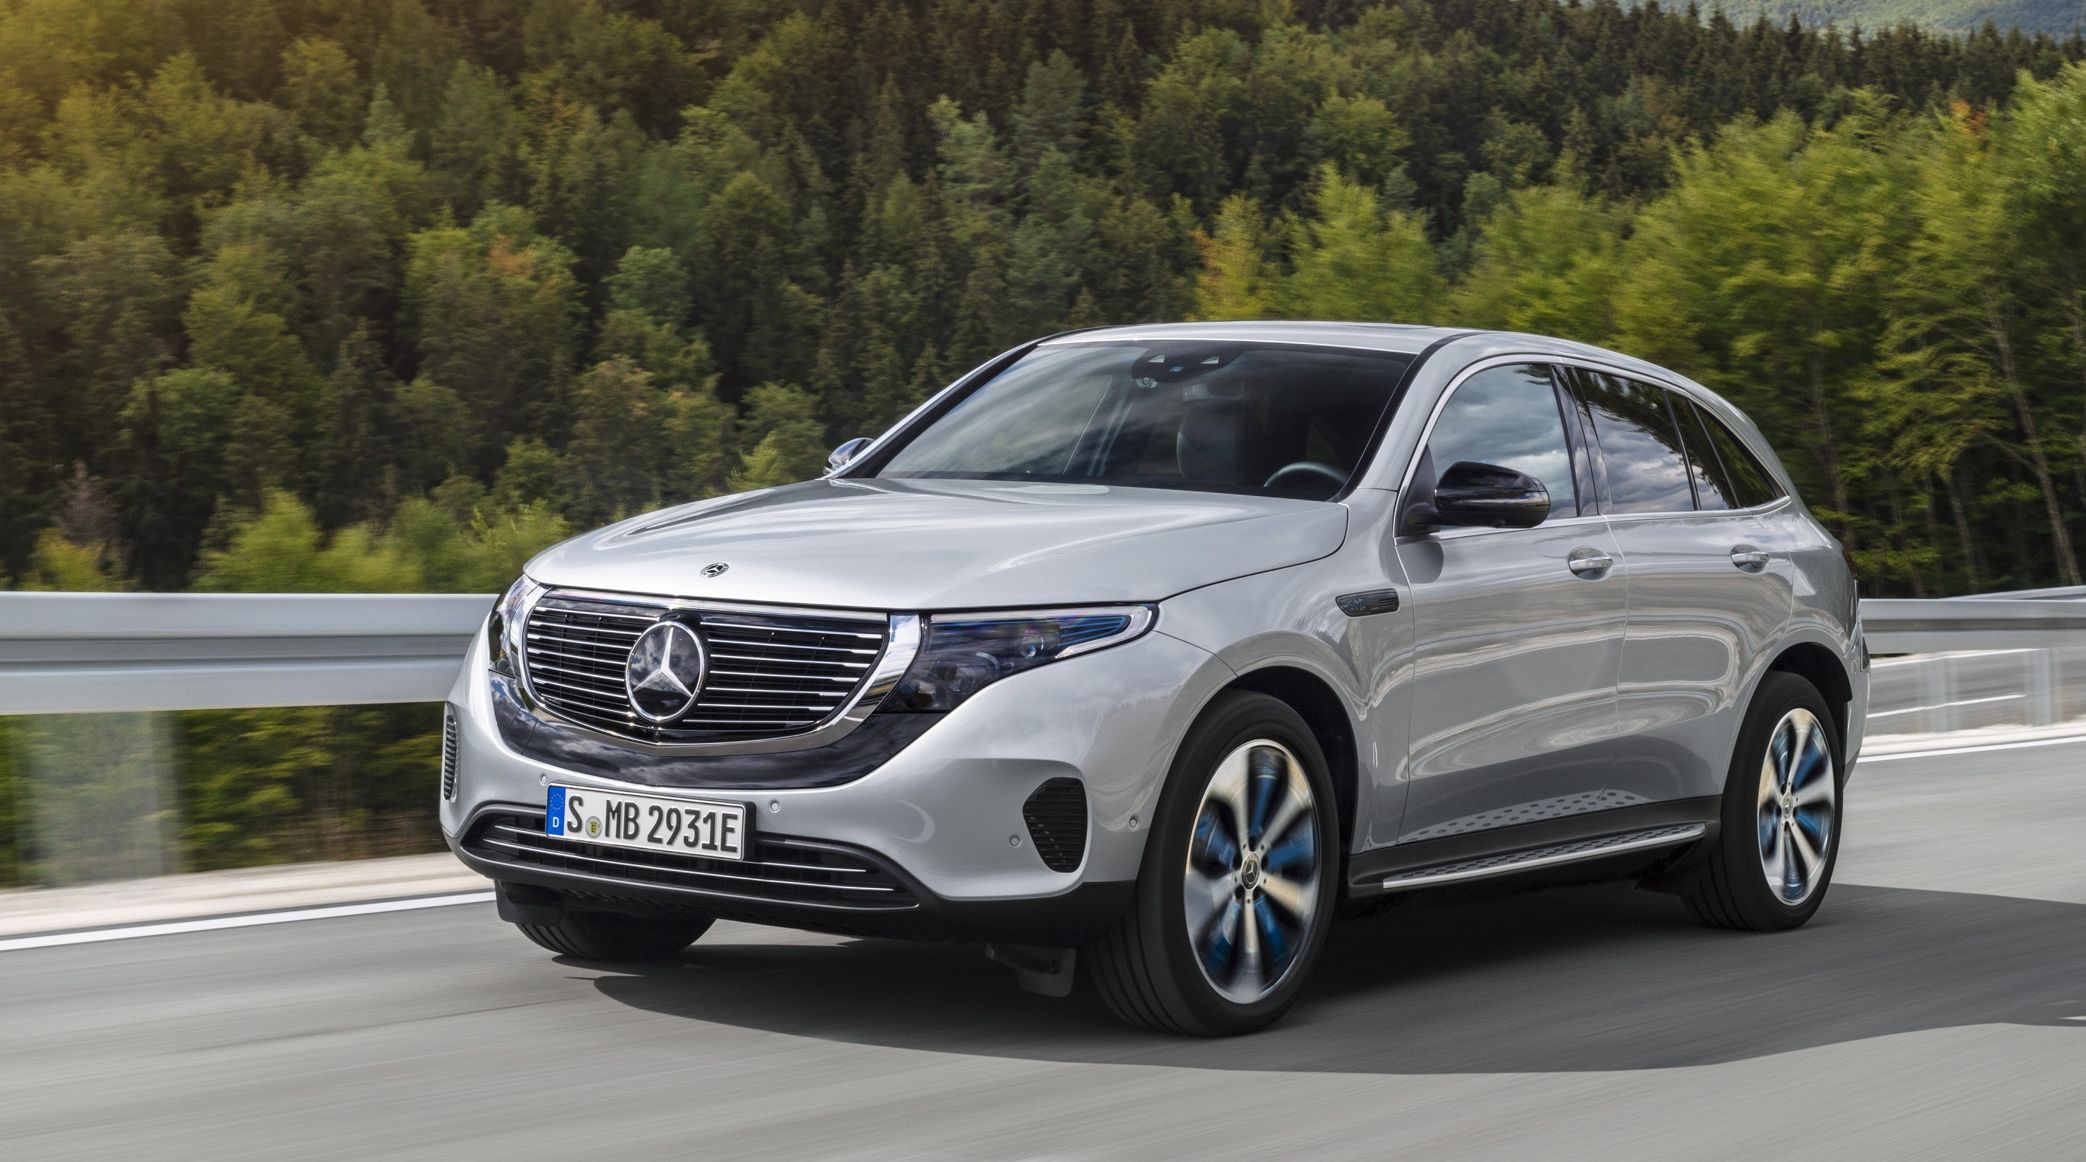 2019 It Seems That Mercedes Is Afraid the EQC EV Can't Compete With Tesla